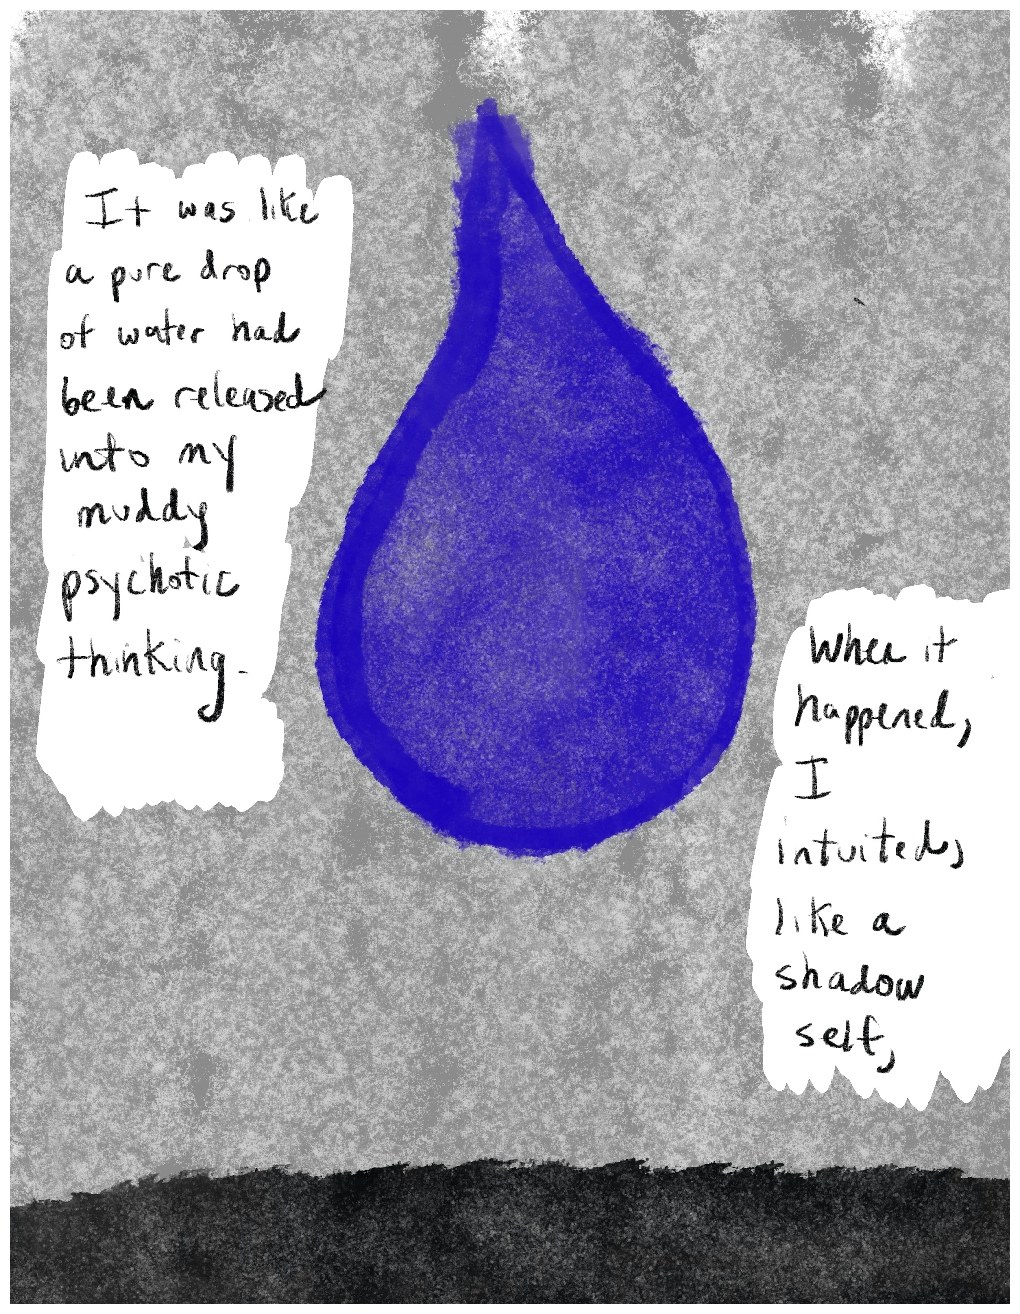 Panel 3 of a four-panel comic called 'I was hallucinating', consisting of thick black line drawing on a mottled grey background. A large blue drop of water is painted in the centre of the panel. On either side of teh droplet are blocks of hand-written text against white backgrounds. Along the bottom of the panel is a strip of black colour. The text reads: "It was like a pure drop of water had been released into my muddy psychotic thinking." "When it happened, I intuited, like a shadow self,"